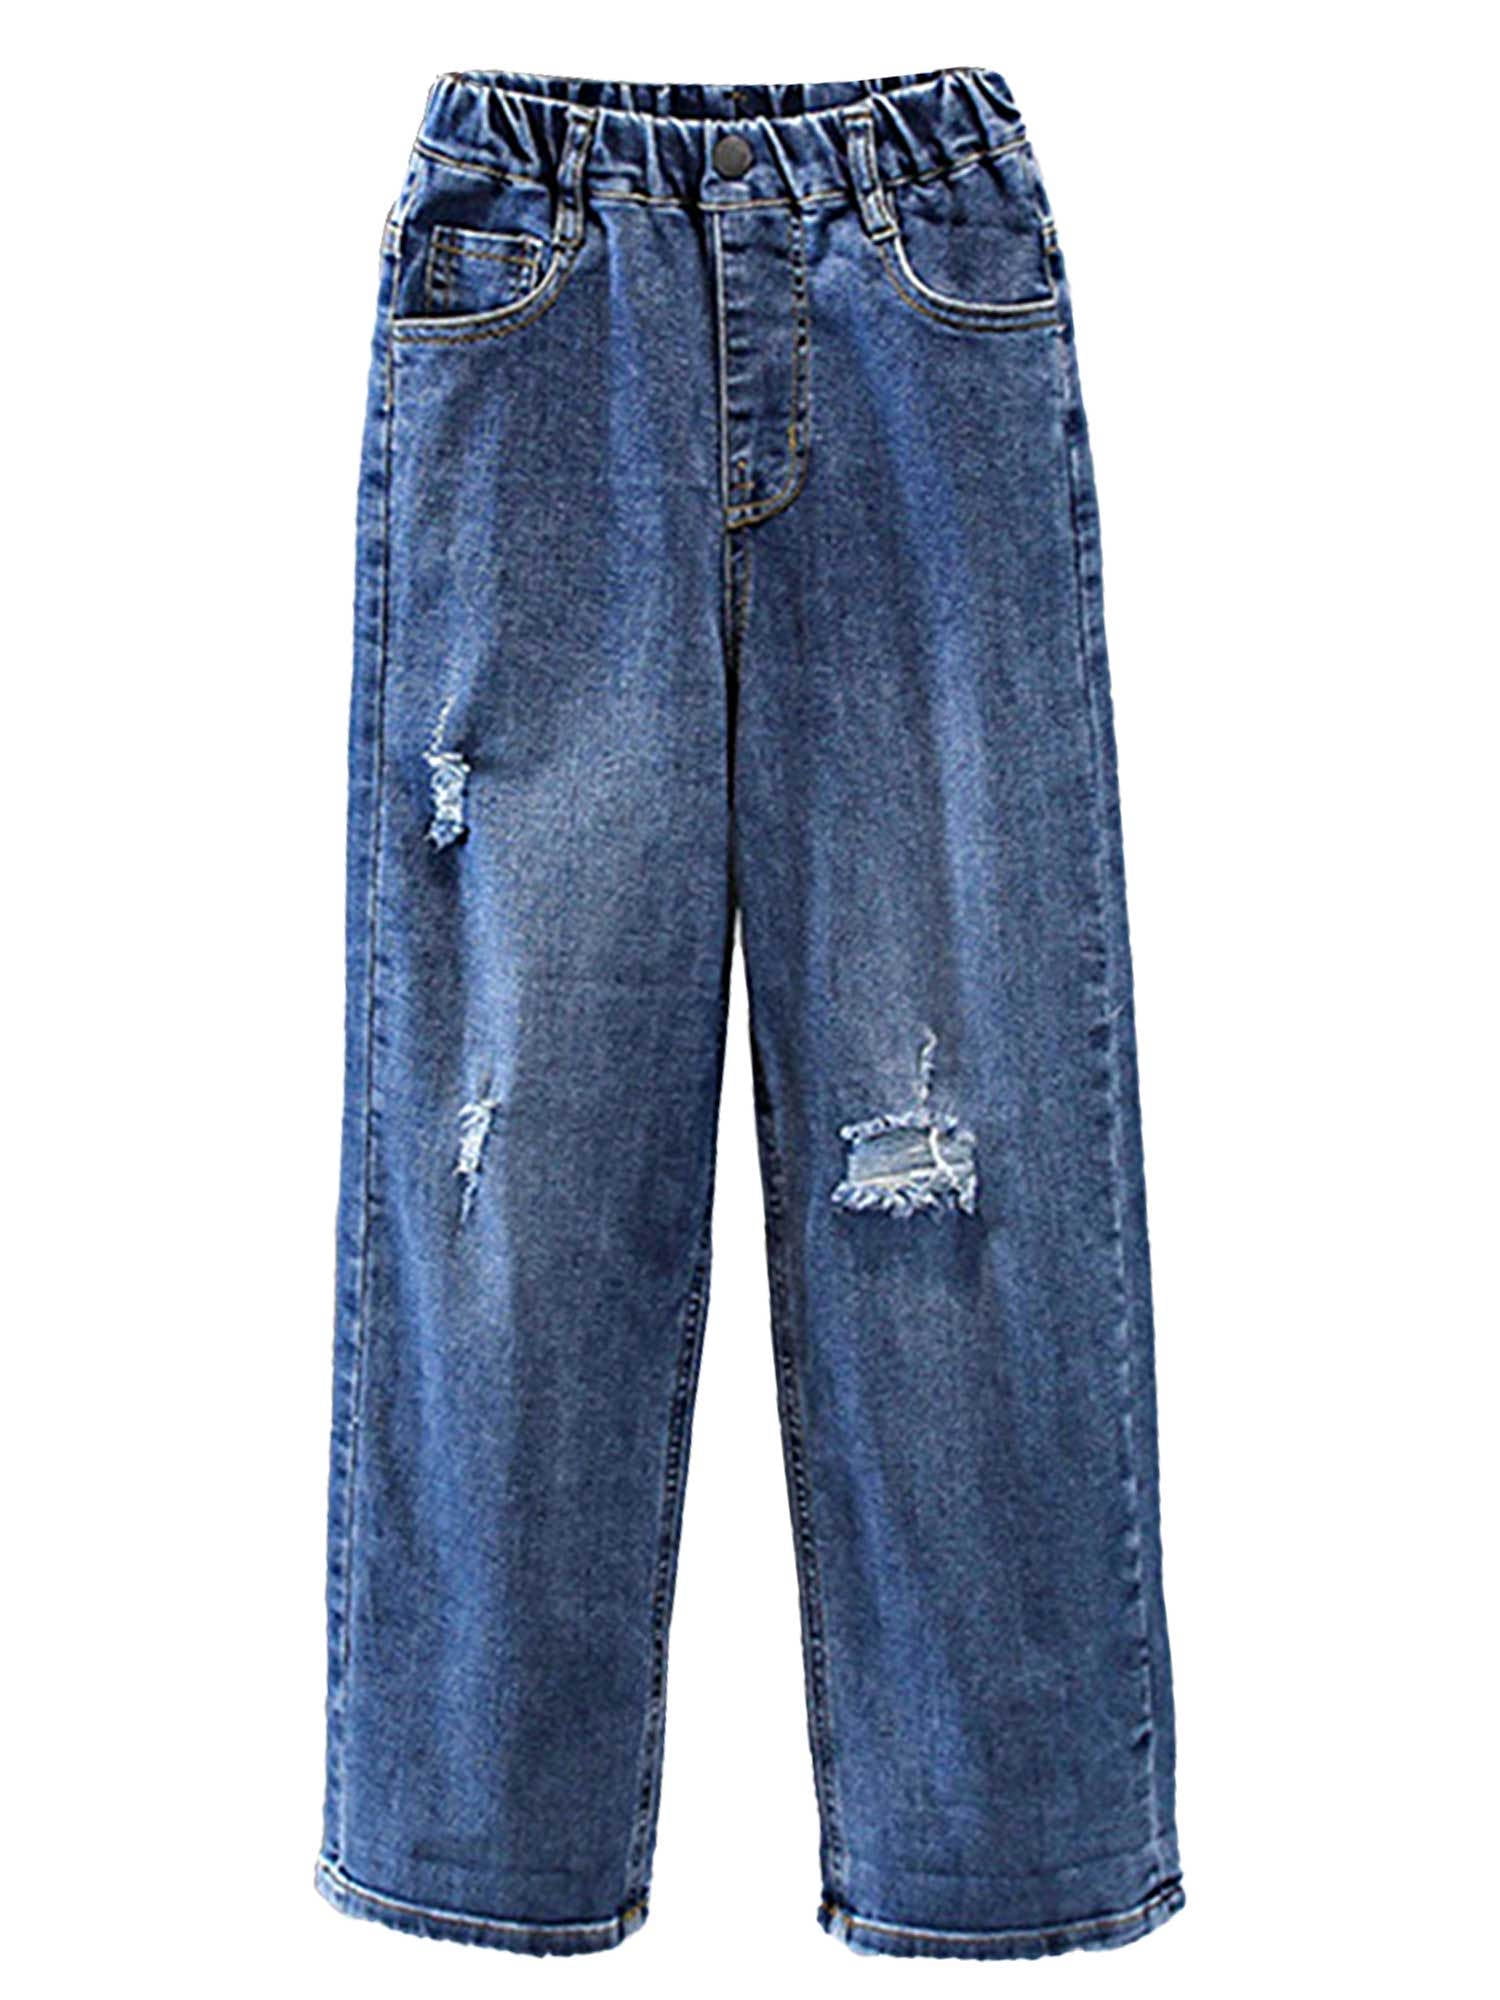 CHICTRY Kids Girls Denim Ripped Wide Leg Pants Casual Jeans with Multi- pocket